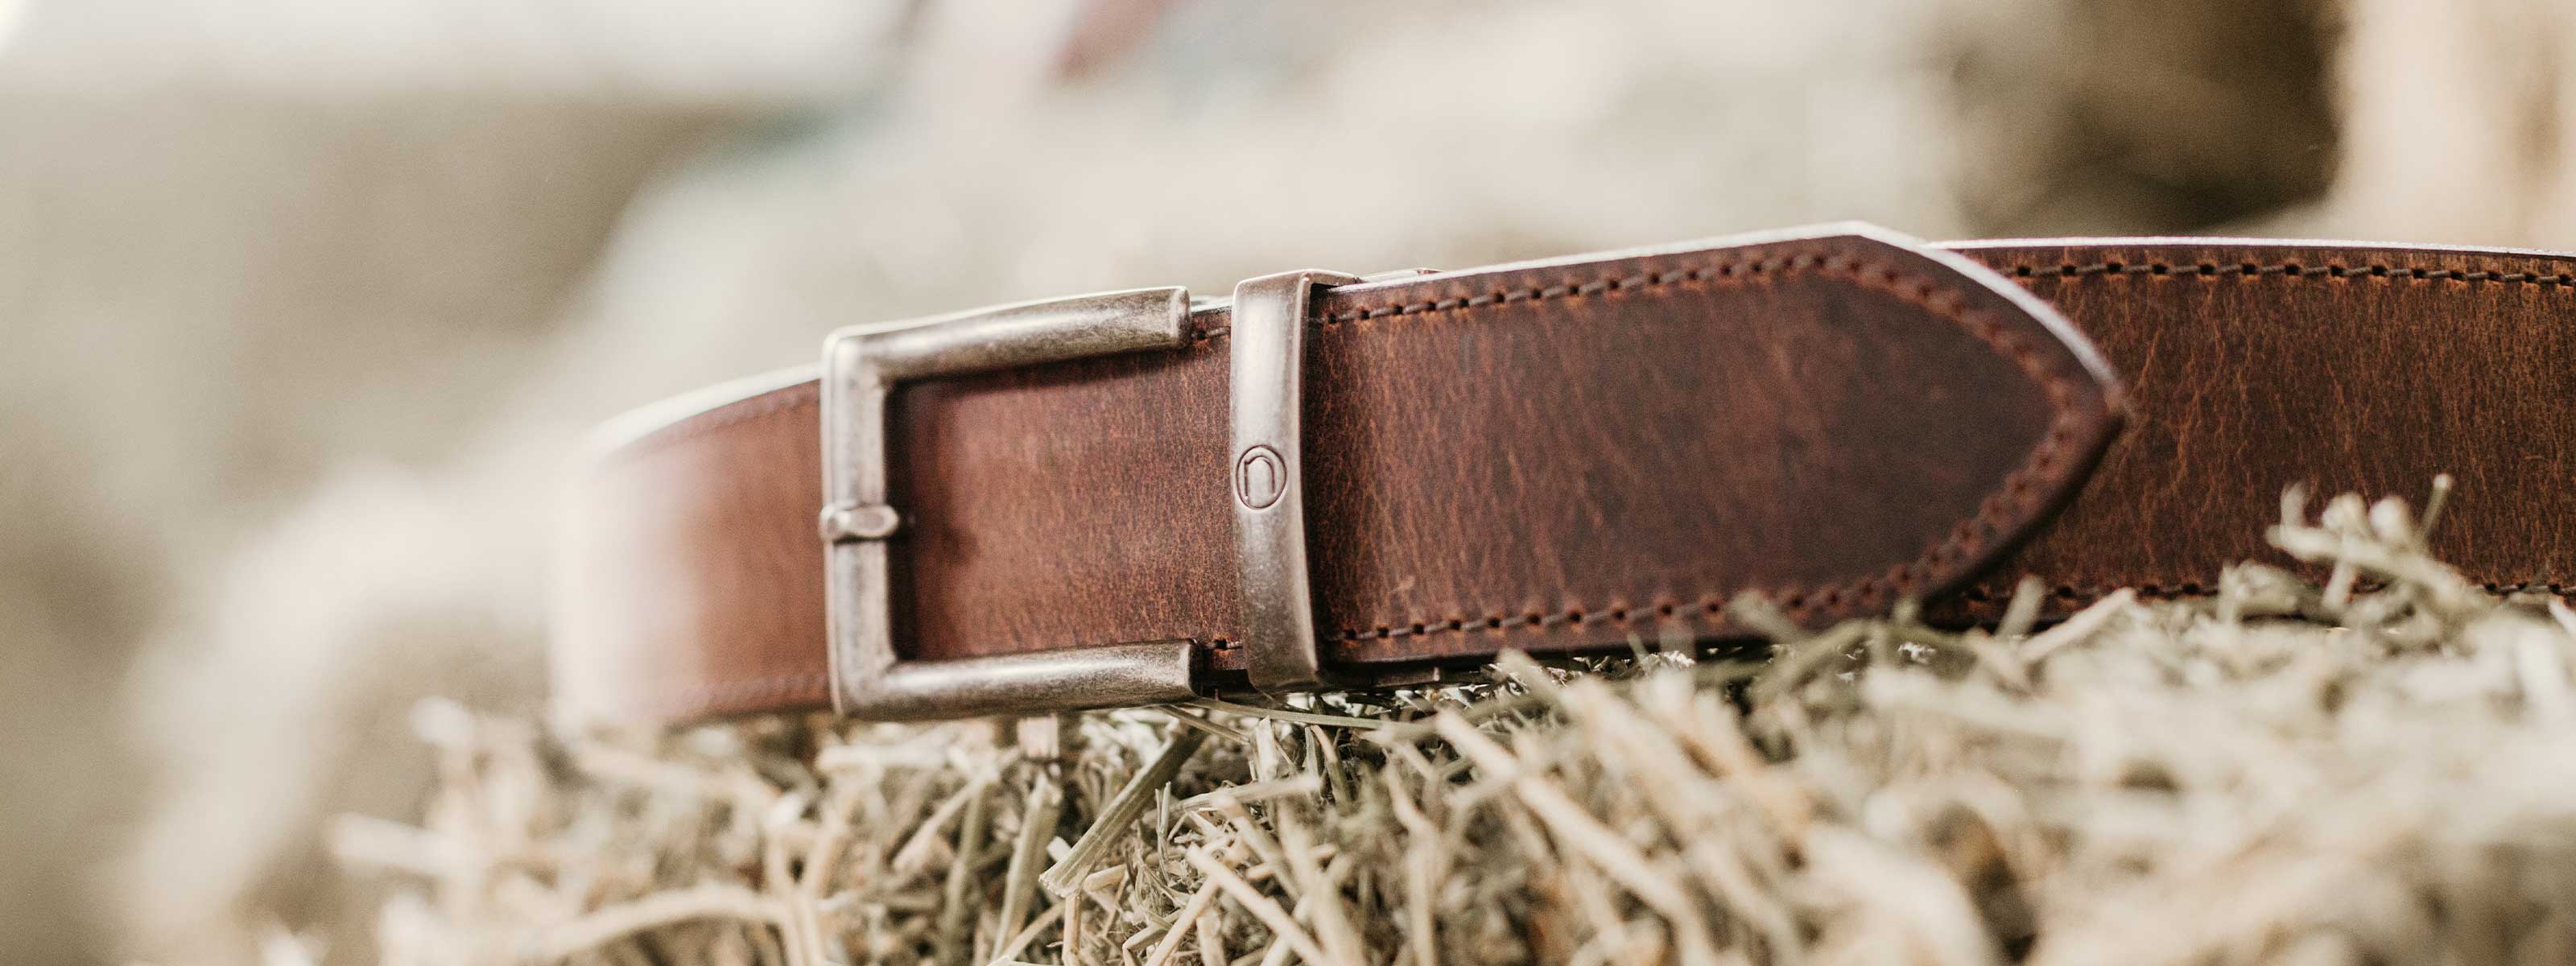 The Crazy Horse belt is our first USA Made EDC Ratchet Belt